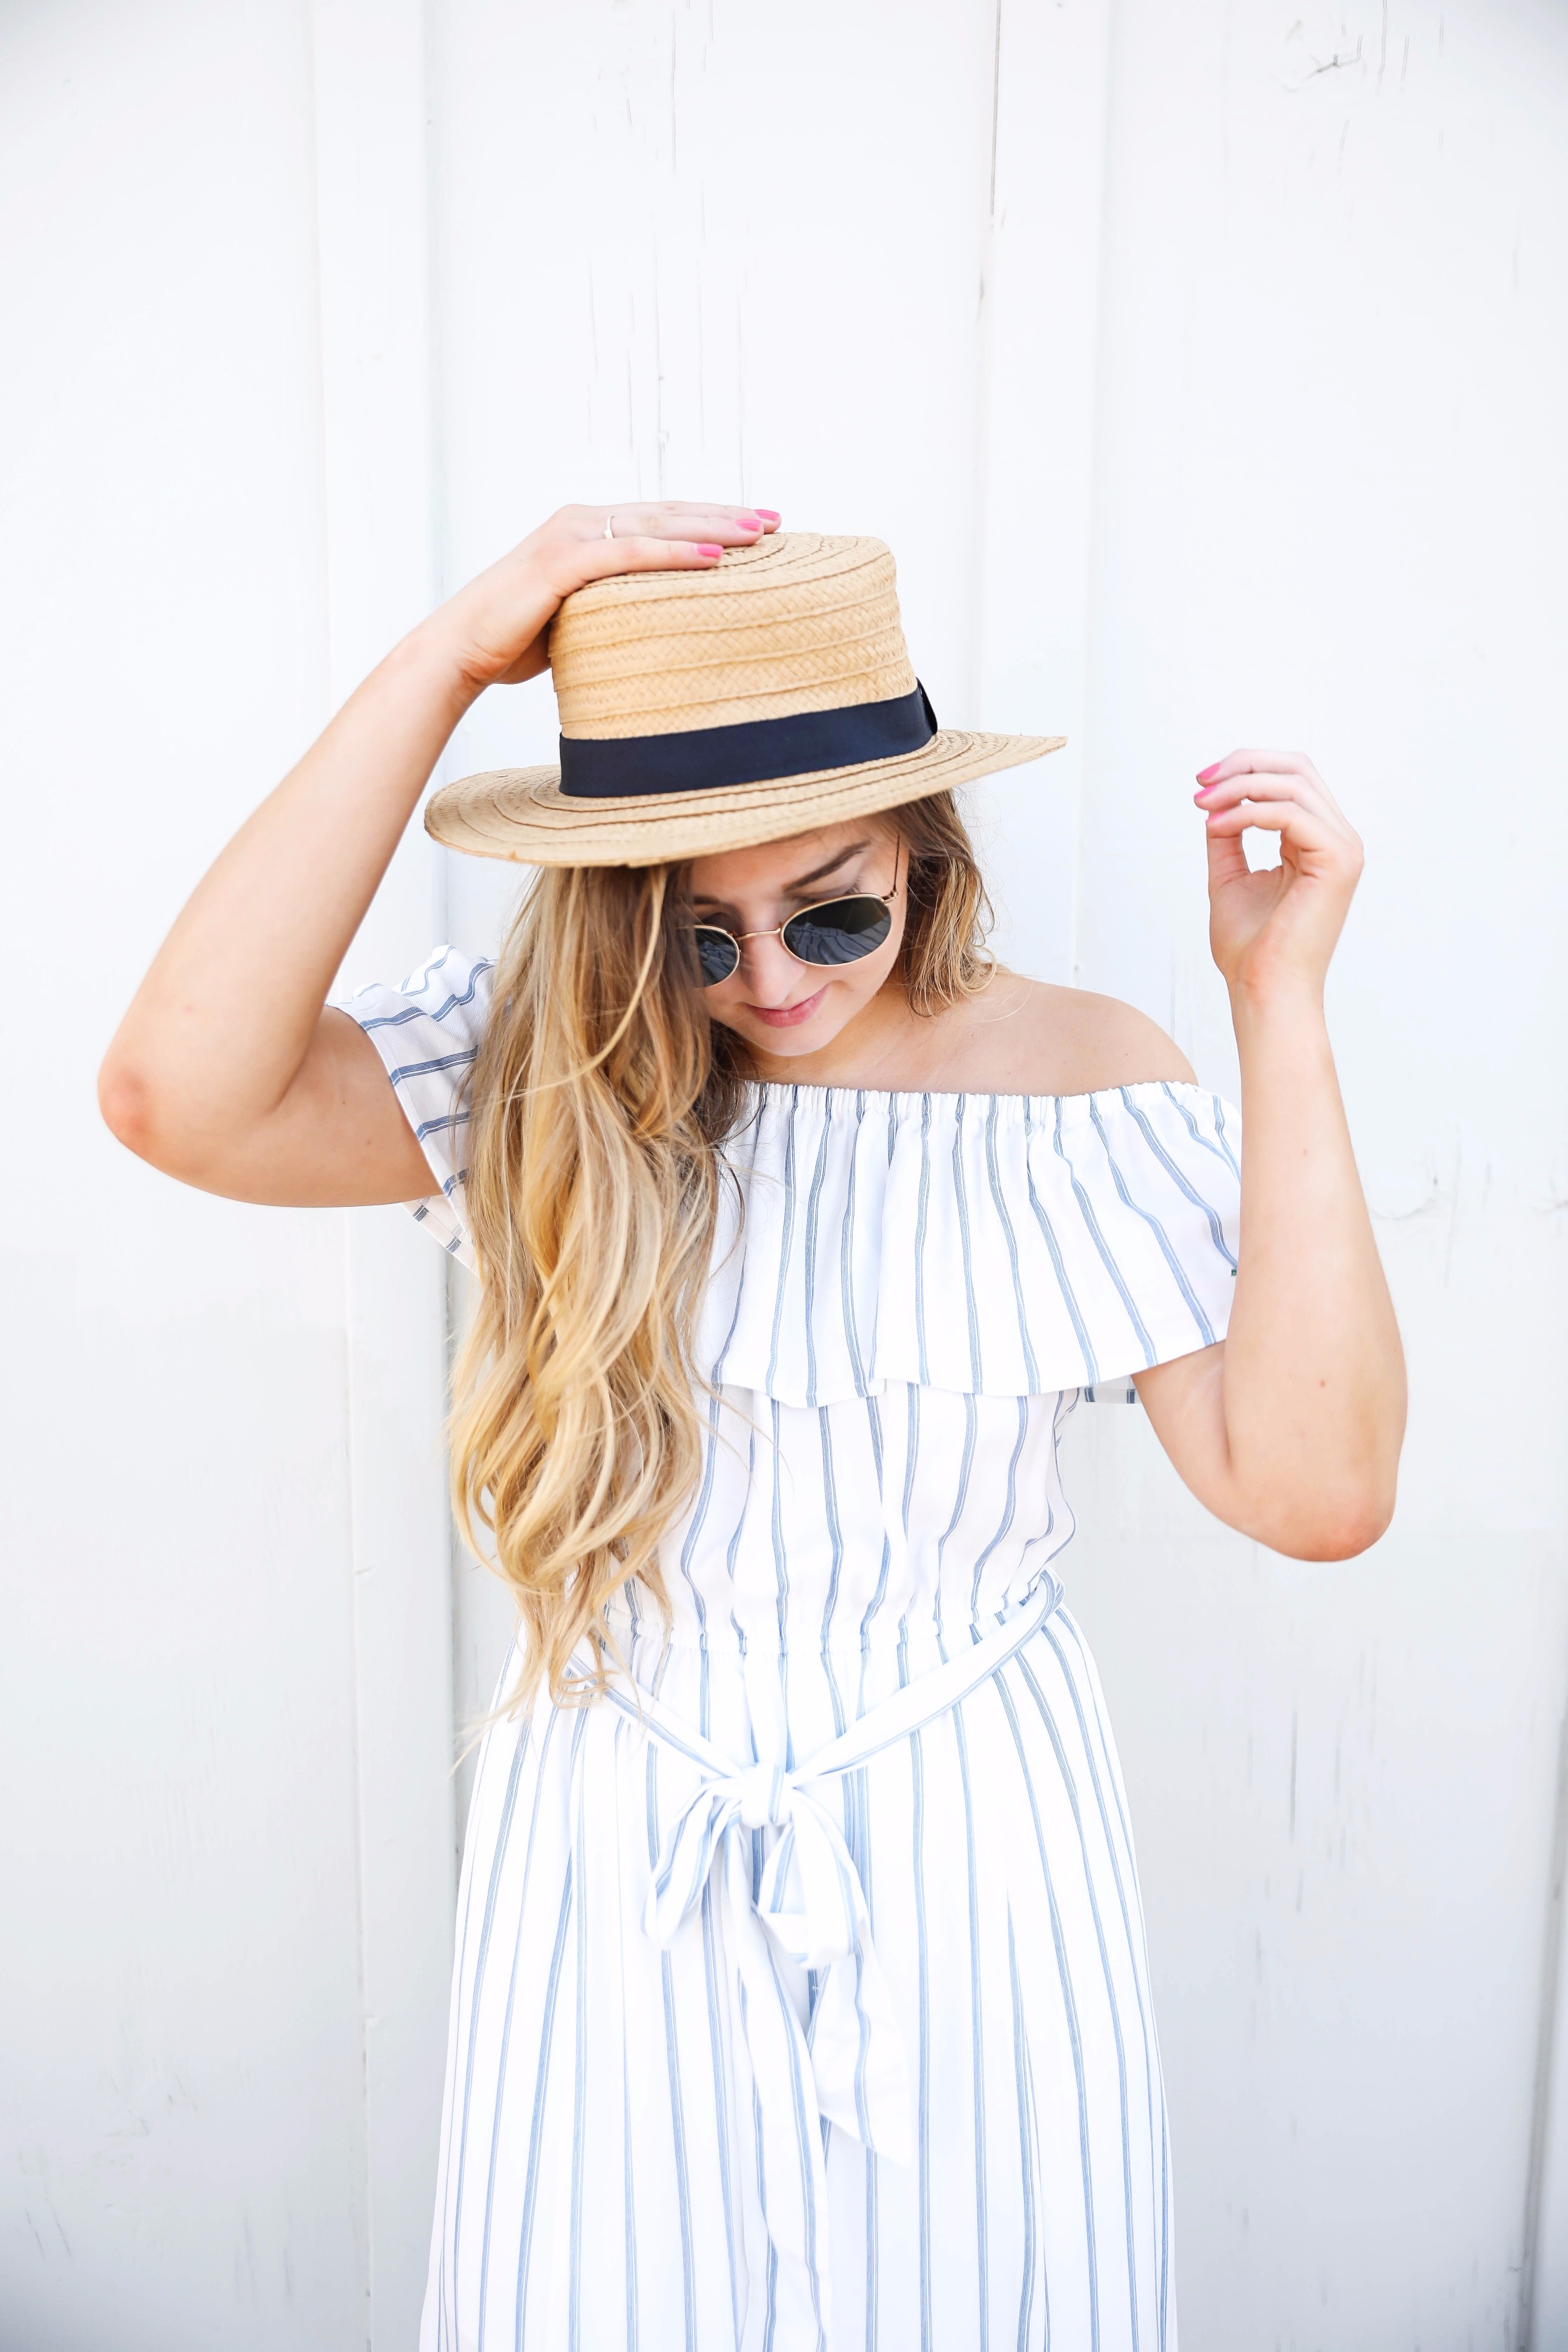 Navy and white striped off the shoulder boardwalk dress! I paired it with a cute boat hat and clubmasters! By fashion blogger daily dose of charm lauren lindmark